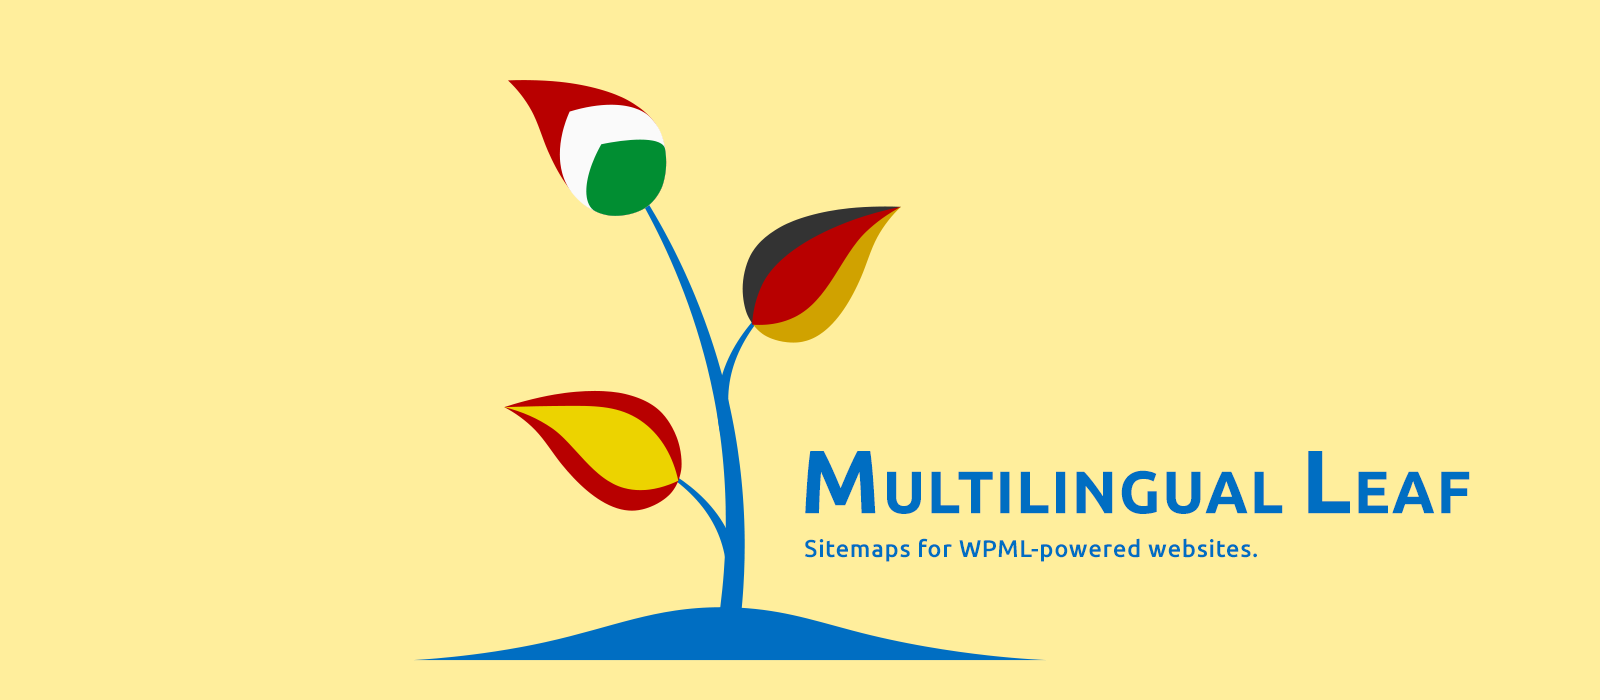 Multilingual Leaf: Finally, the Missing Link Between SiteTree and WPML